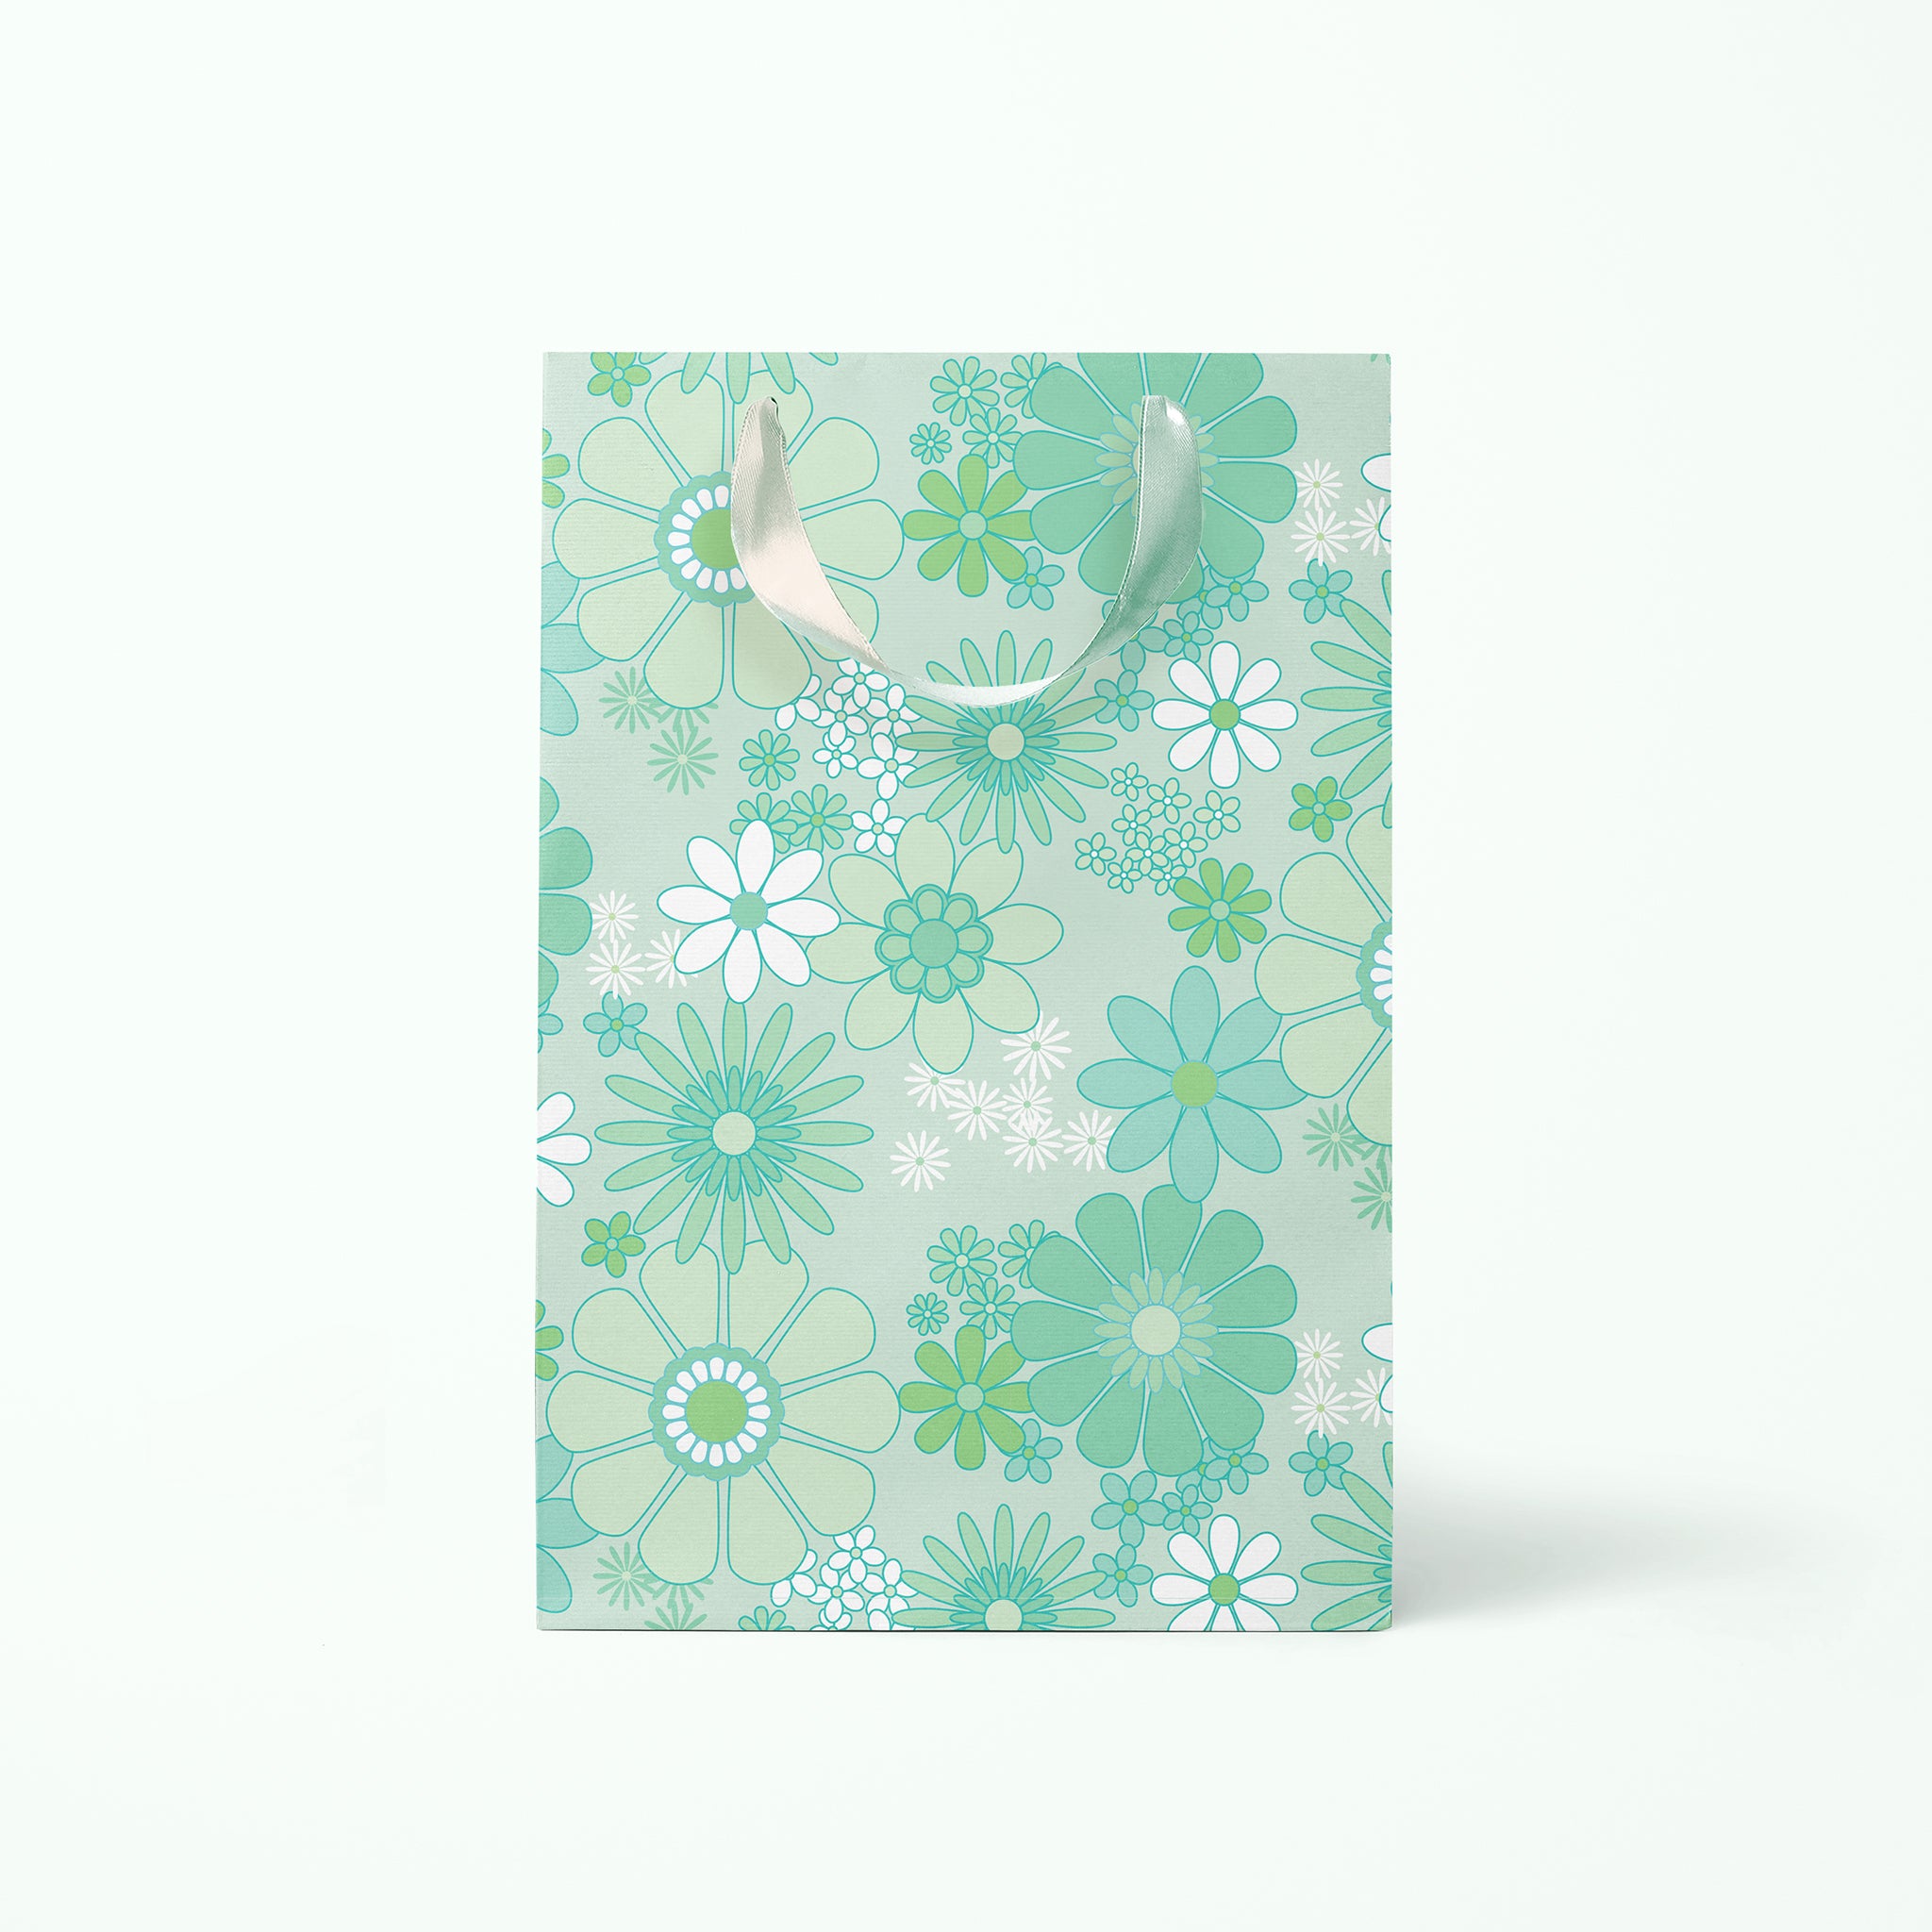 On a white background is a rendering of the medium gift bag with a mint and white floral print and ribbon handles.